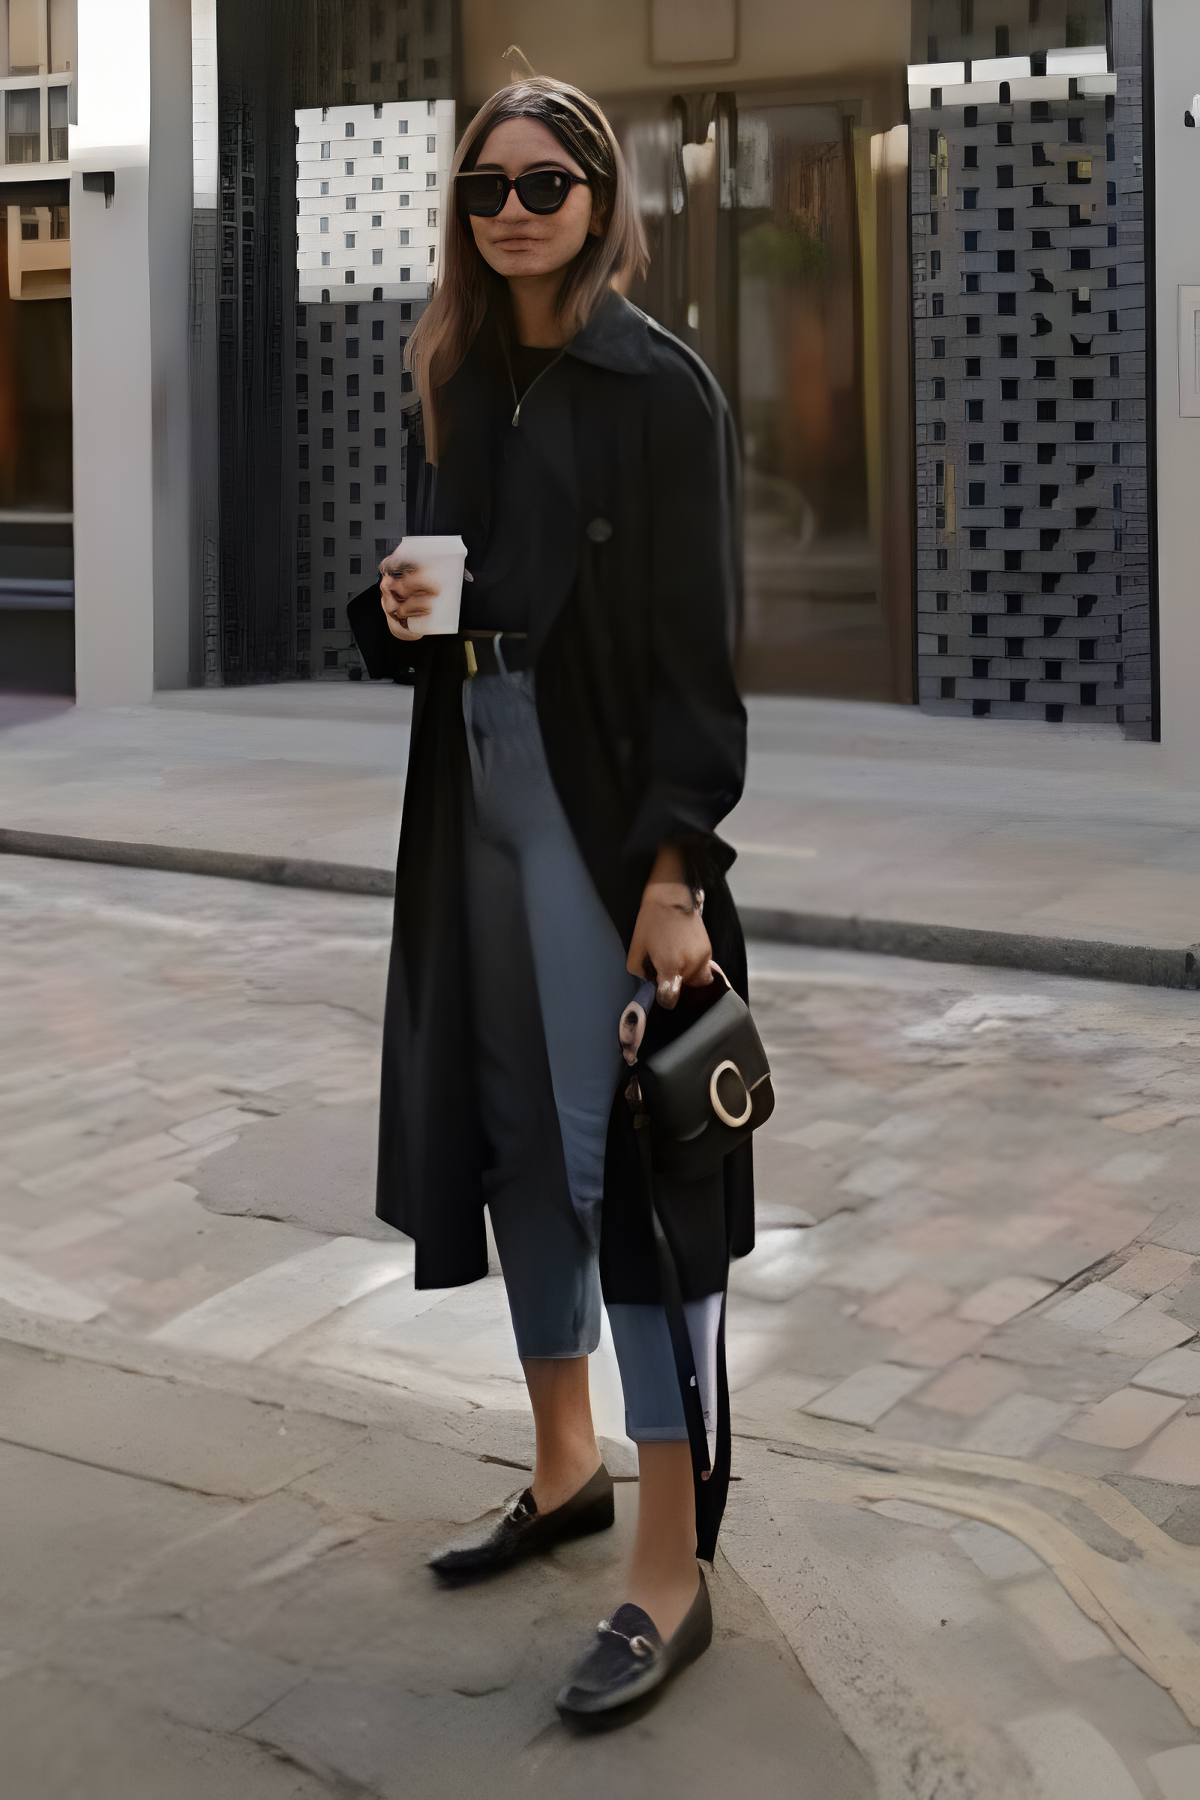 How to Wear a Black Coat: Black Coat Outfit Ideas